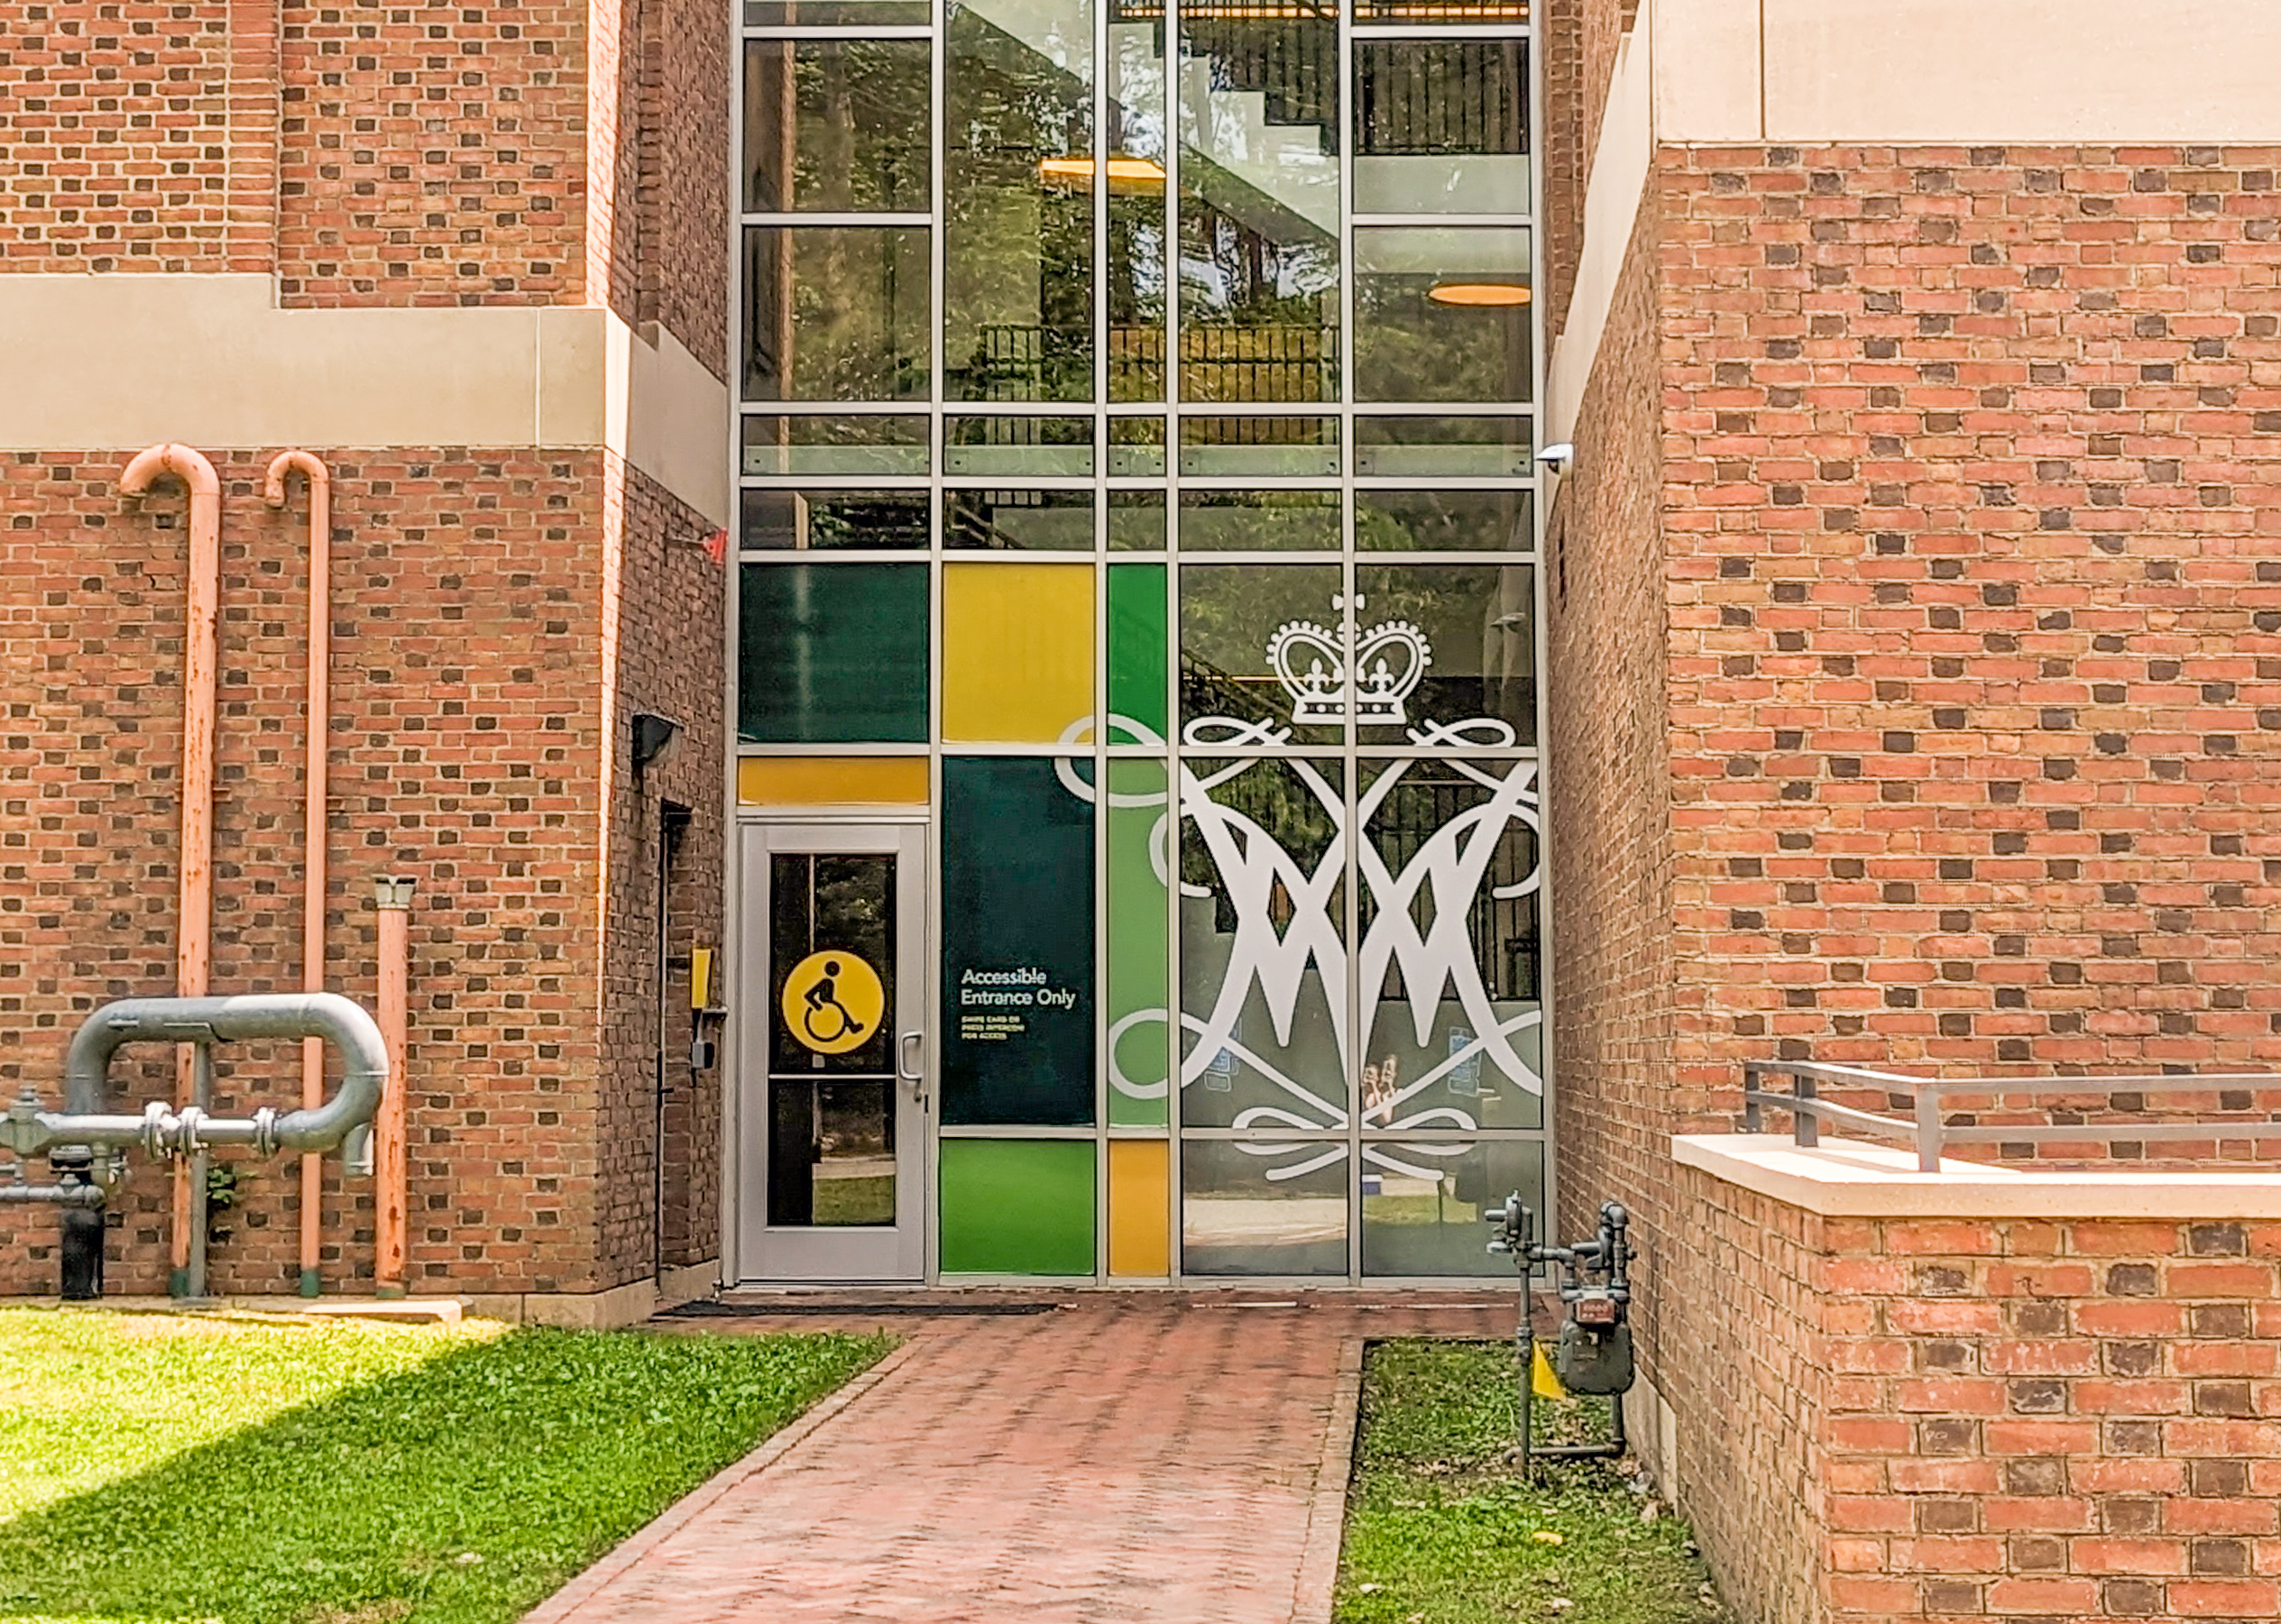 Back entrance to Swem Library marked with a large white cypher and yellow accessibility icon